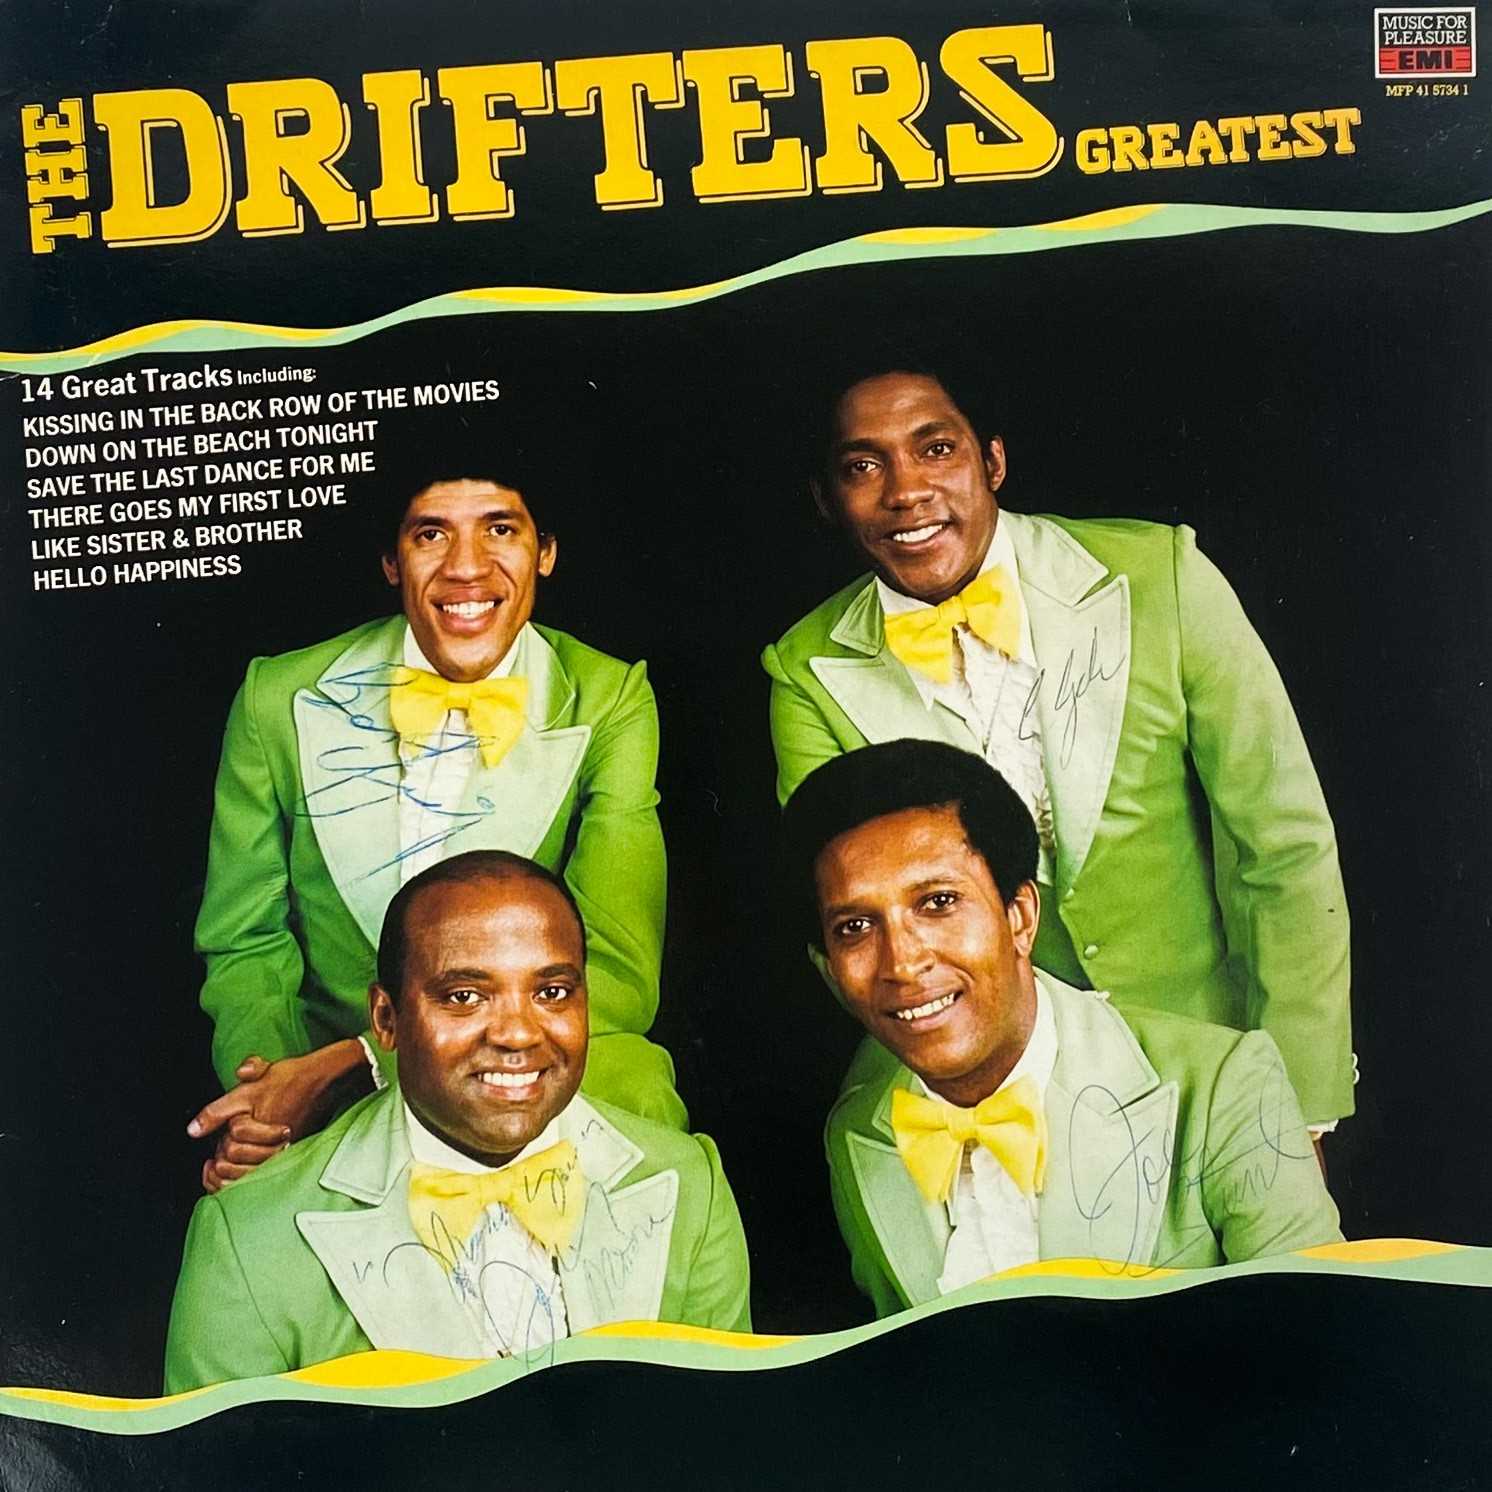 Signed; The Drifters - Image 4 of 11